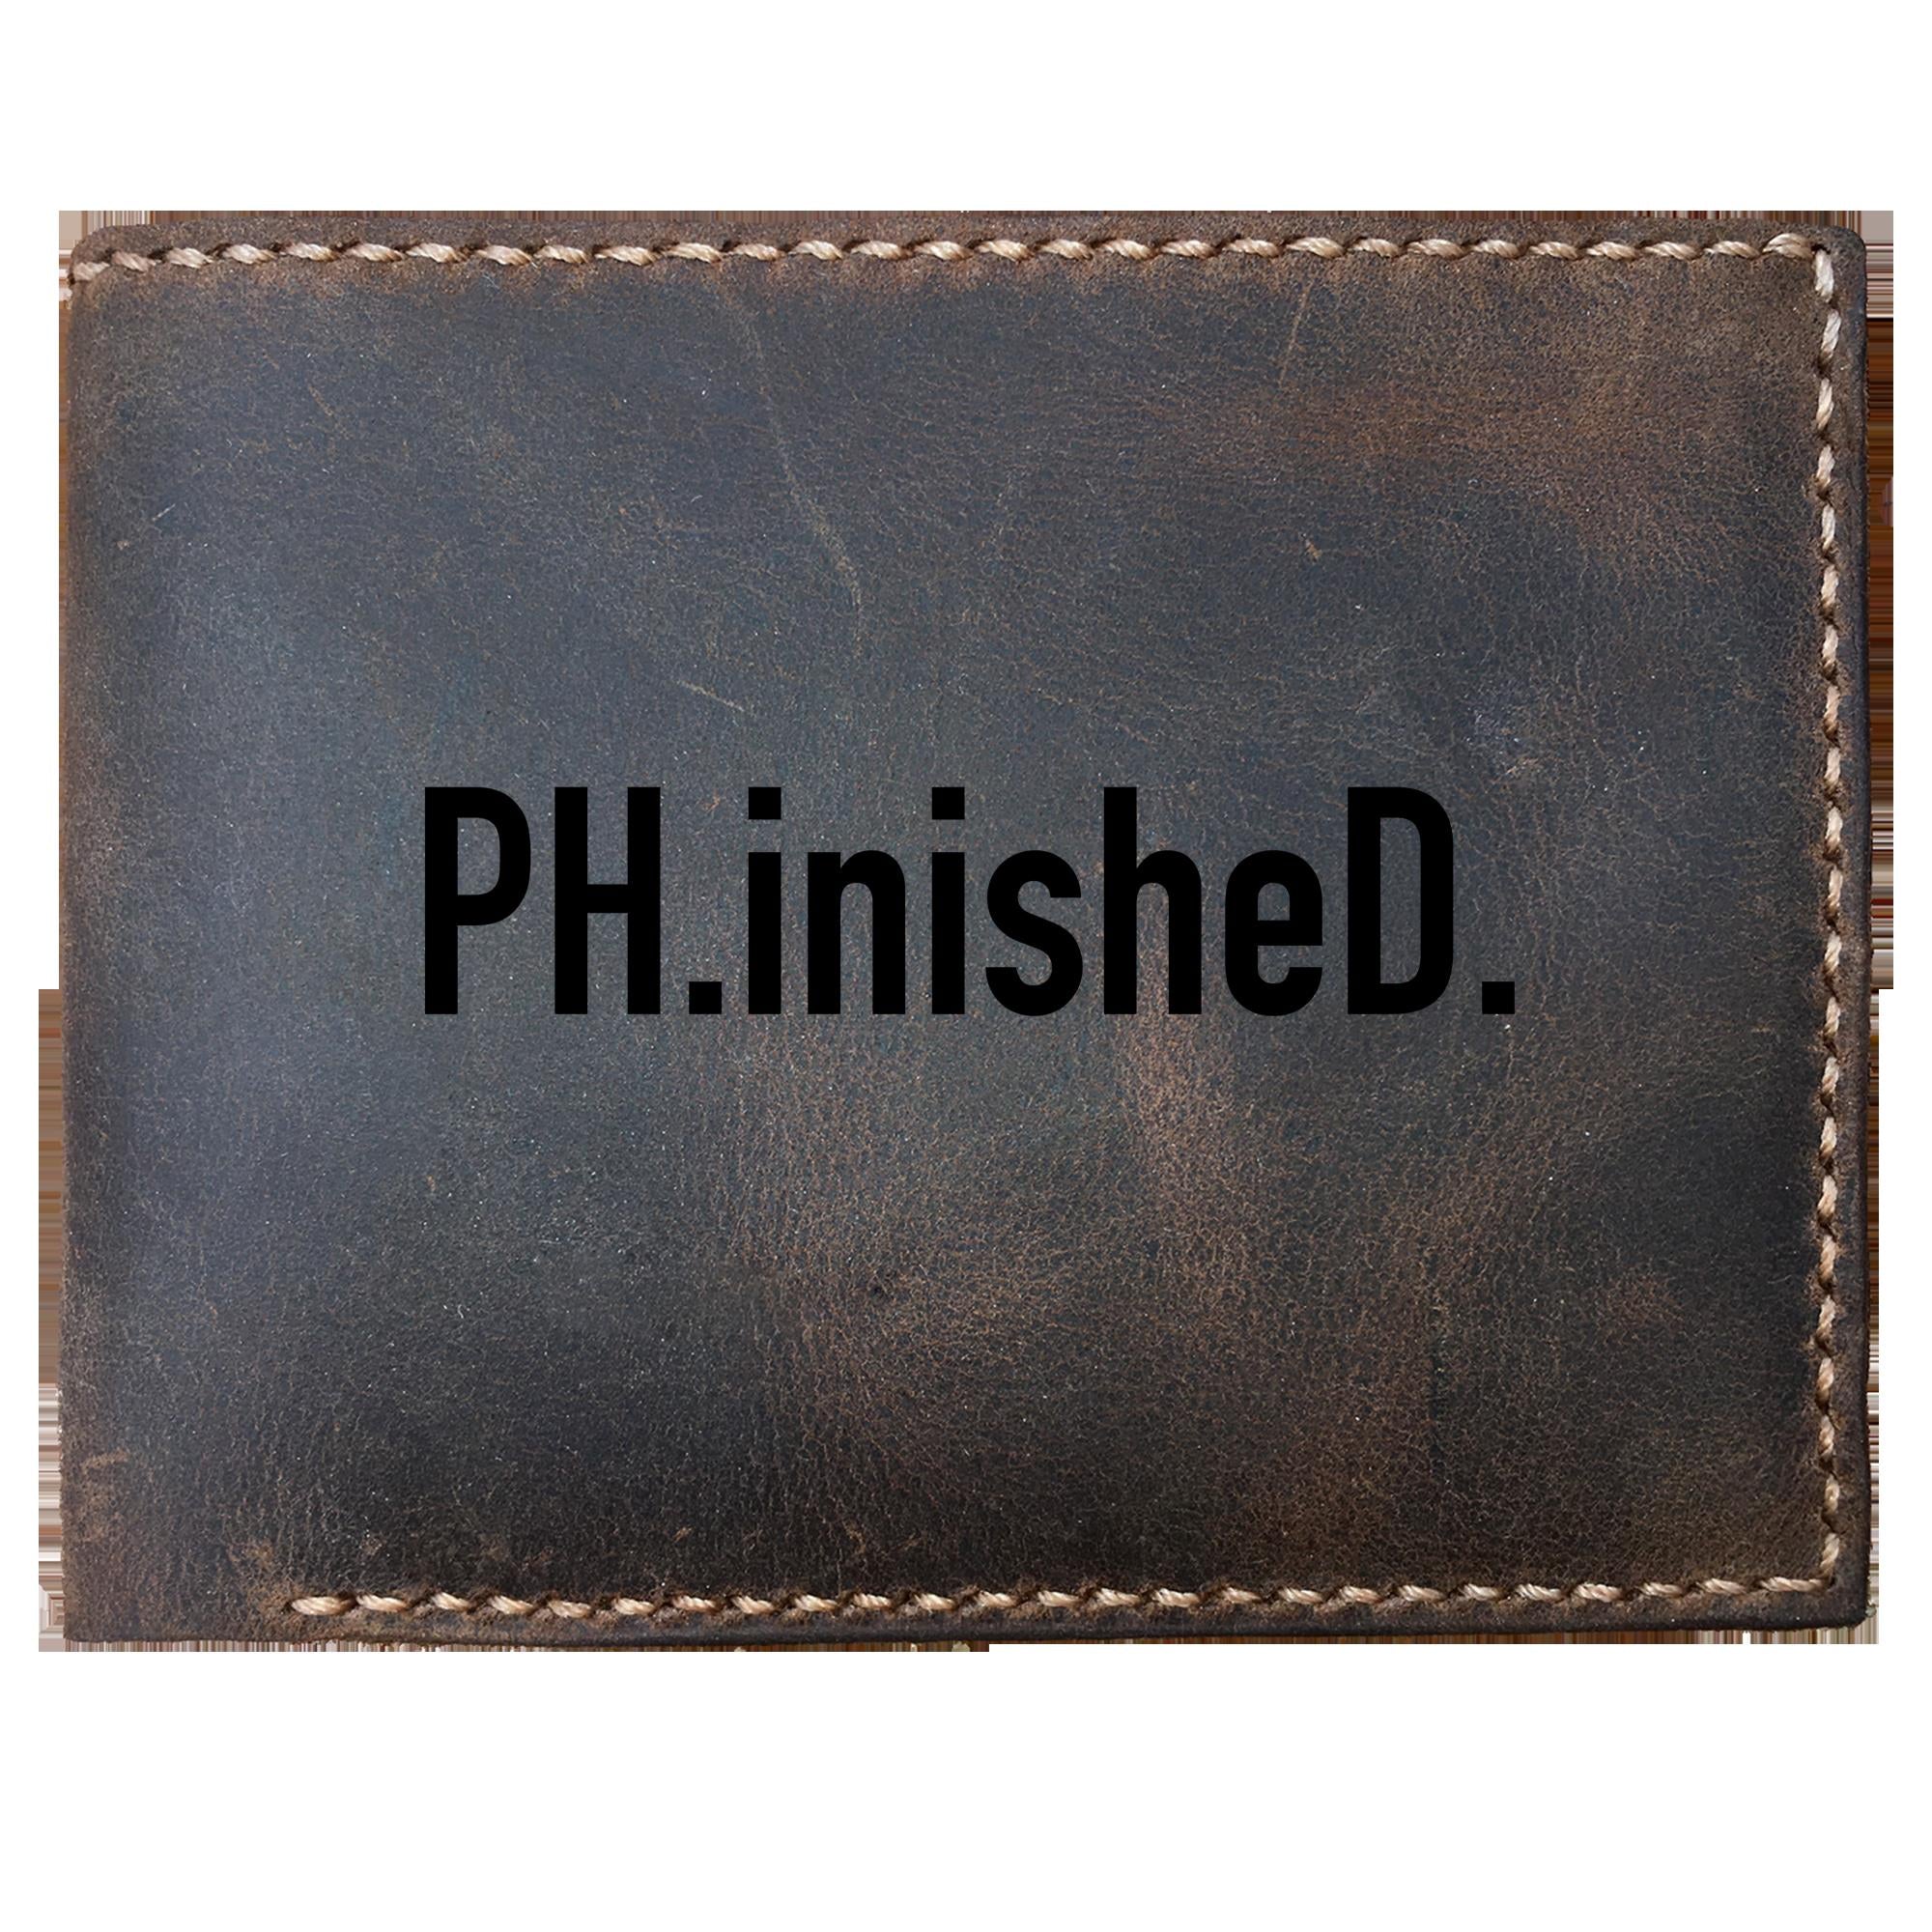 Skitongifts Funny Custom Laser Engraved Bifold Leather Wallet For Men, Doctorate Ph.Inished. Funny Ph.D. Graduation